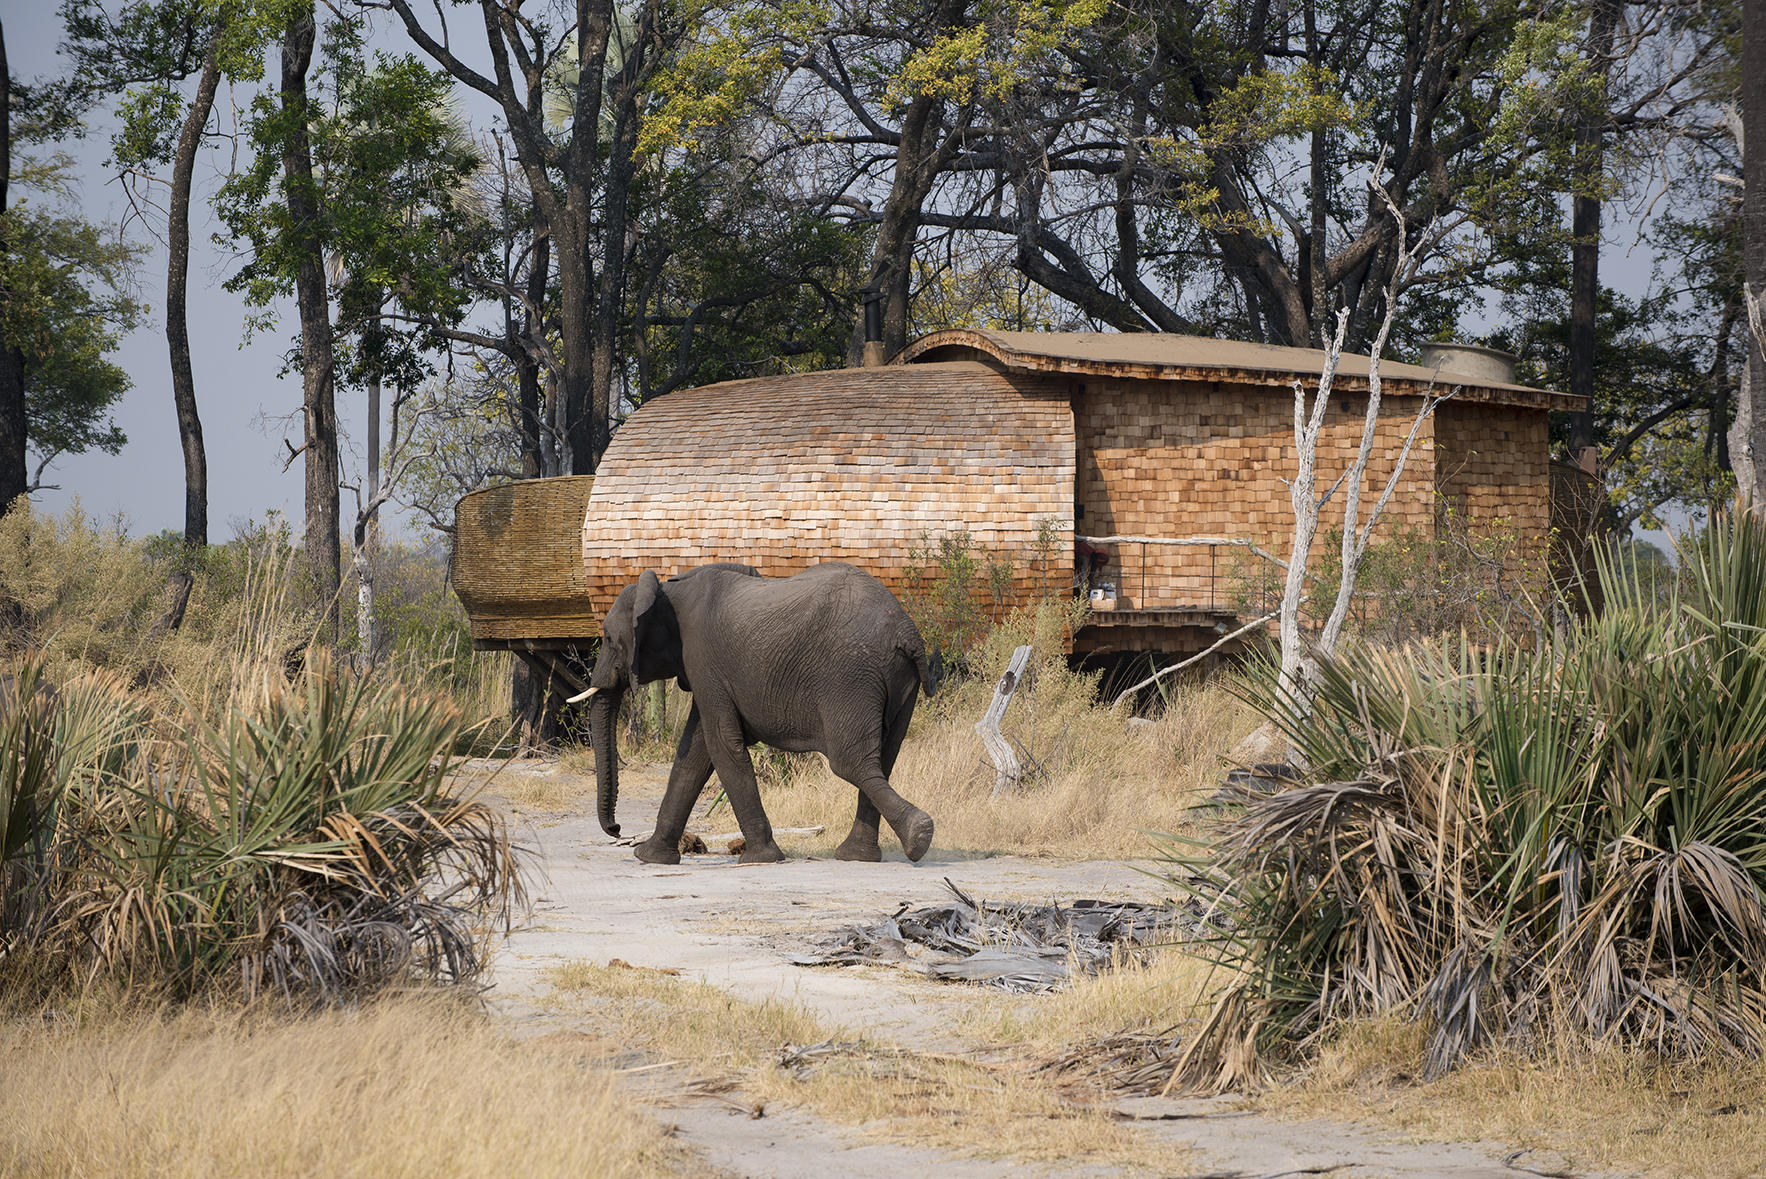 An elephant walking between the buildings outside a suite at the Sandibe resort